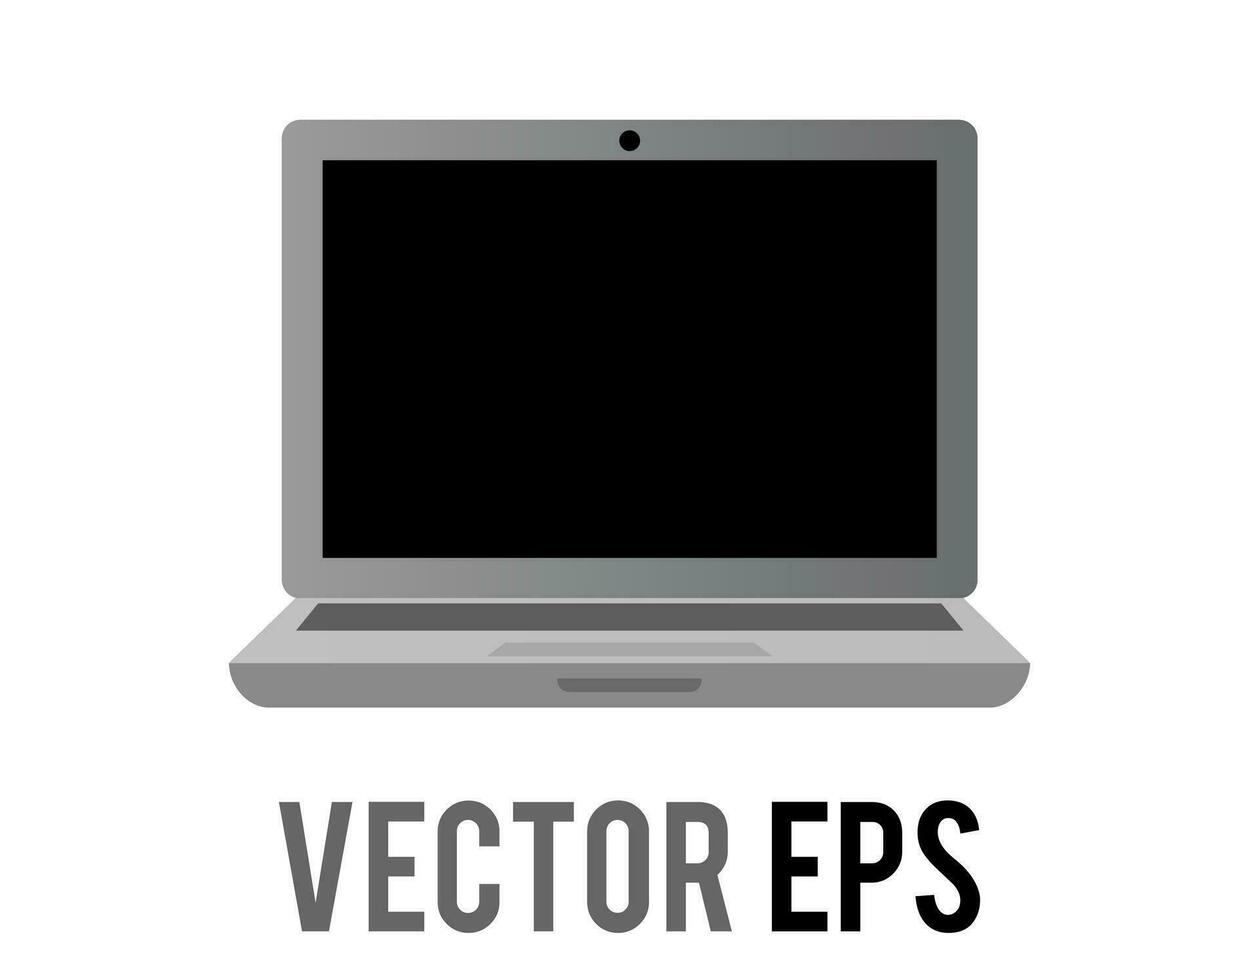 Vector silver laptop personal computer icon with showing empty screen, keyboard, touchpad